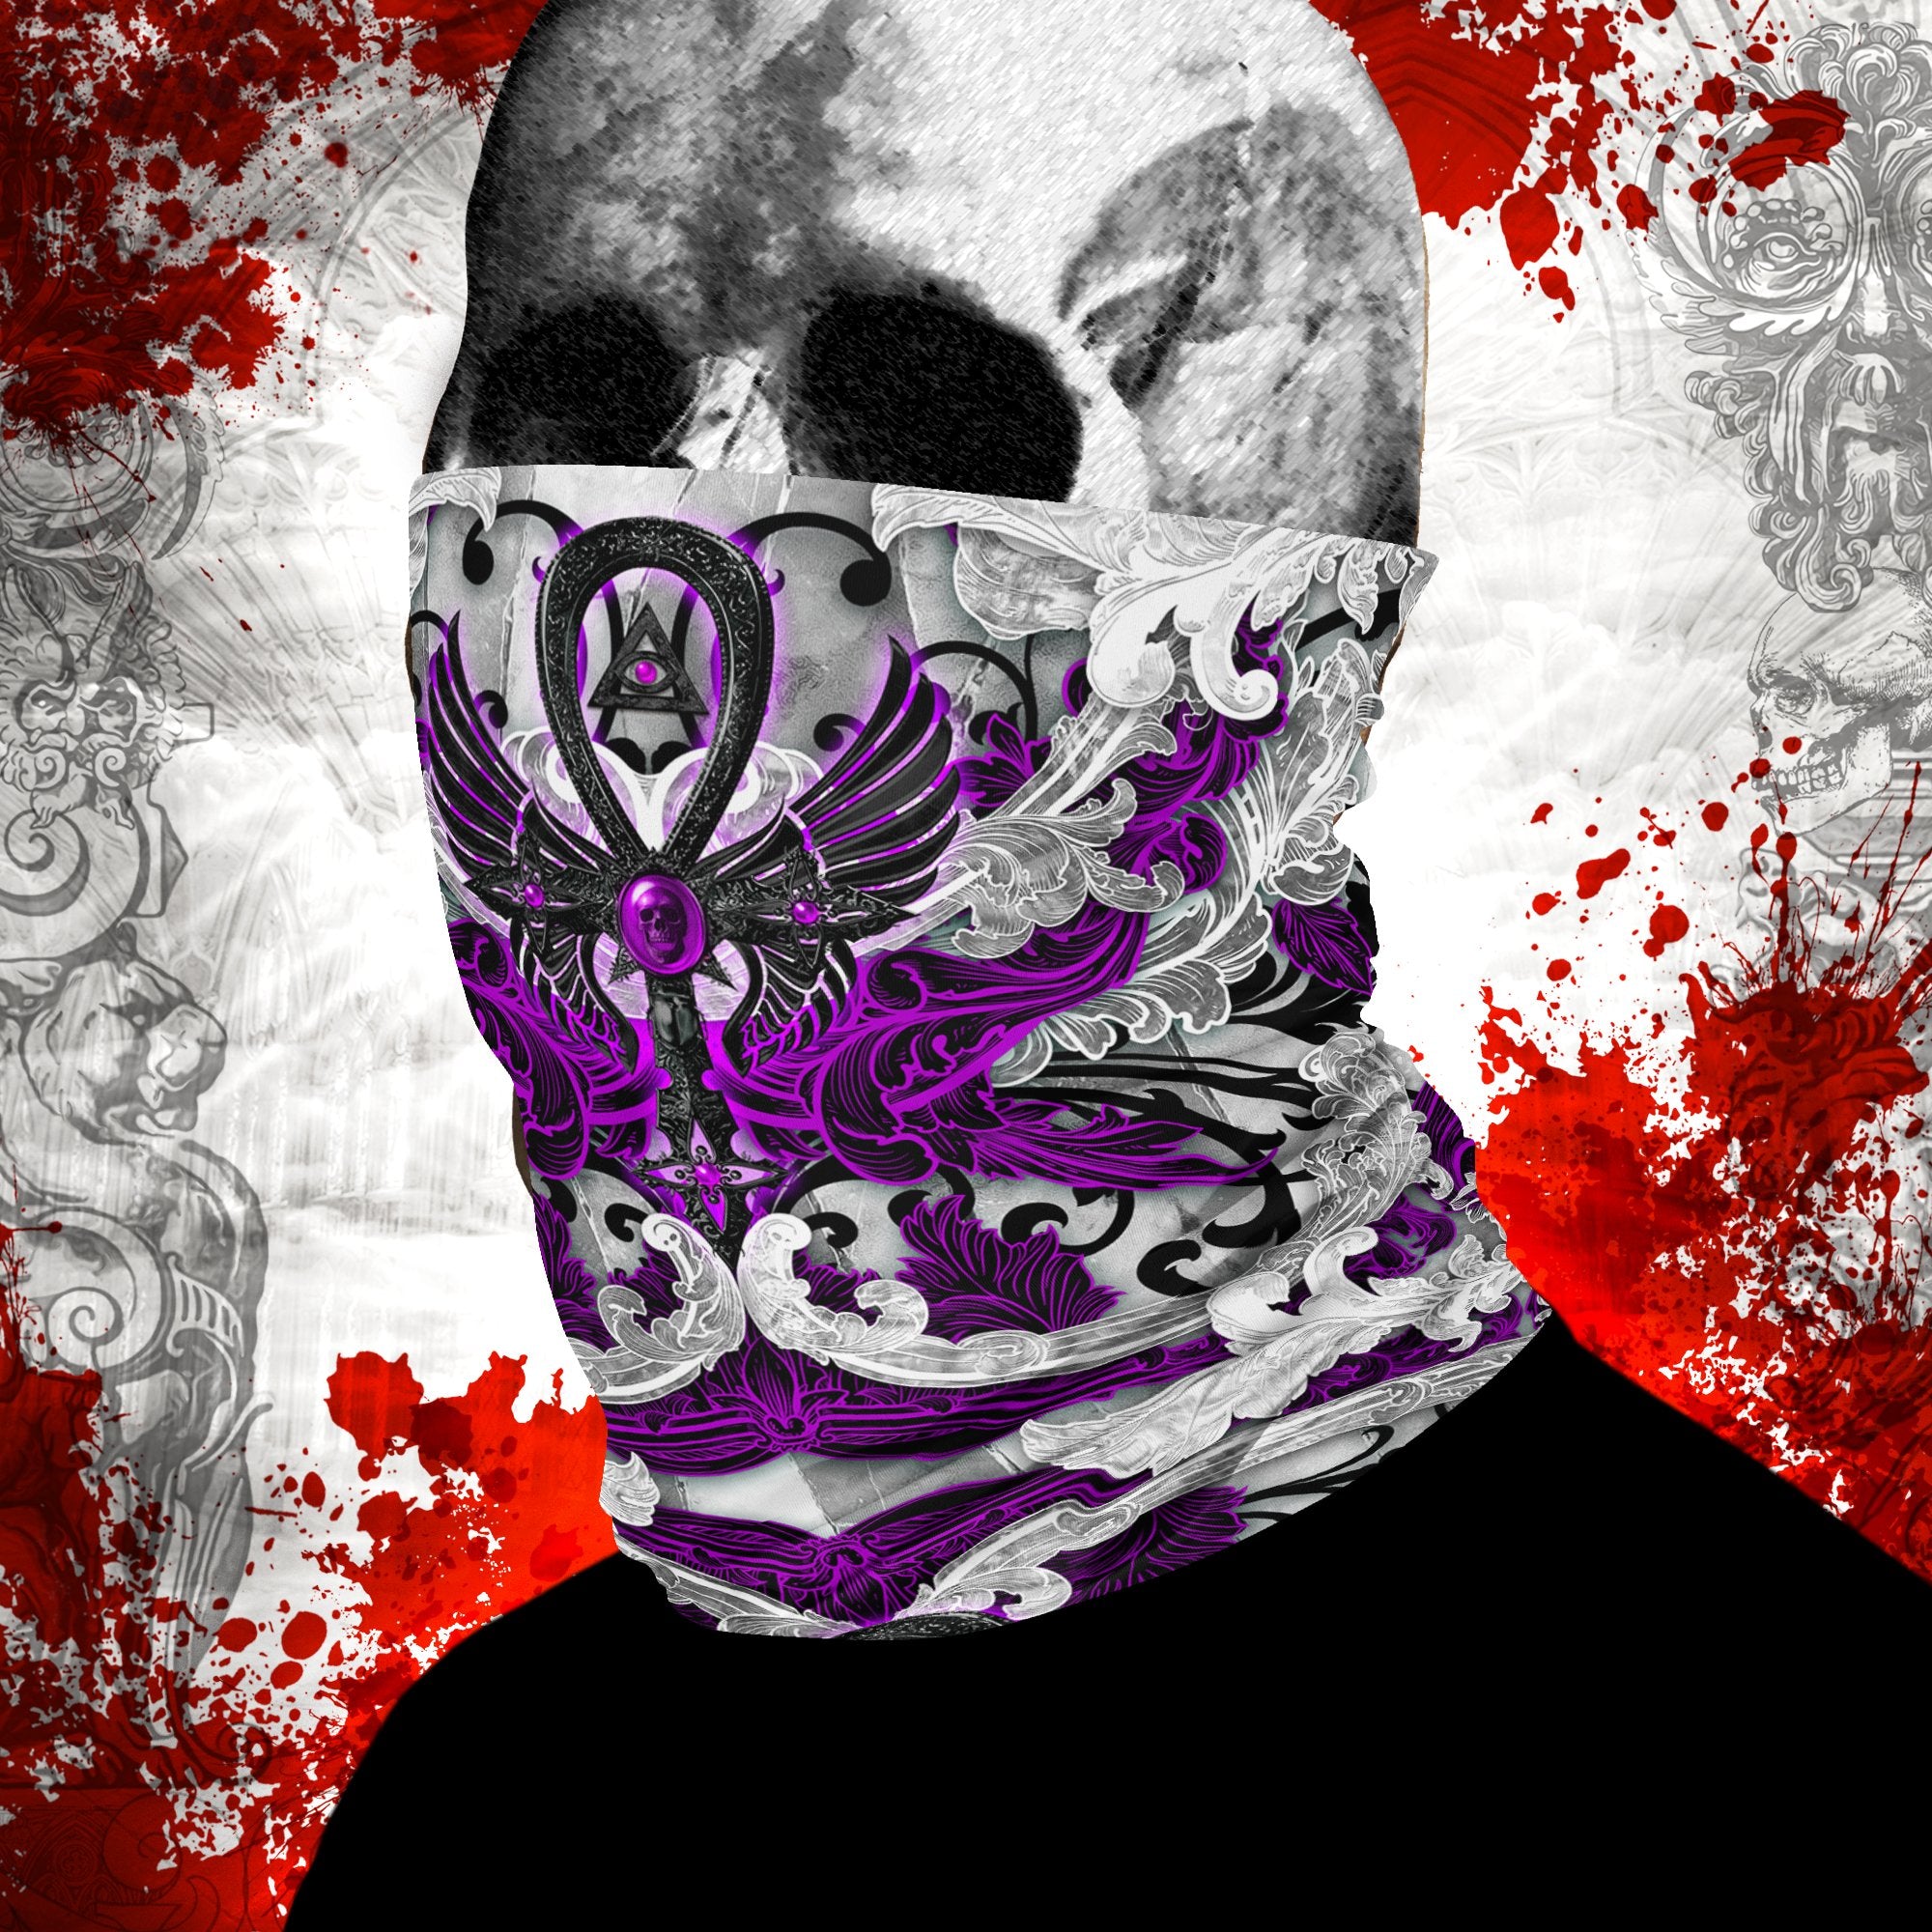 White Goth Ankh Neck Gaiter, Face Mask, Printed Head Covering, Gothic Street Outfit - Black, Red and Purple, 4 Colors - Abysm Internal